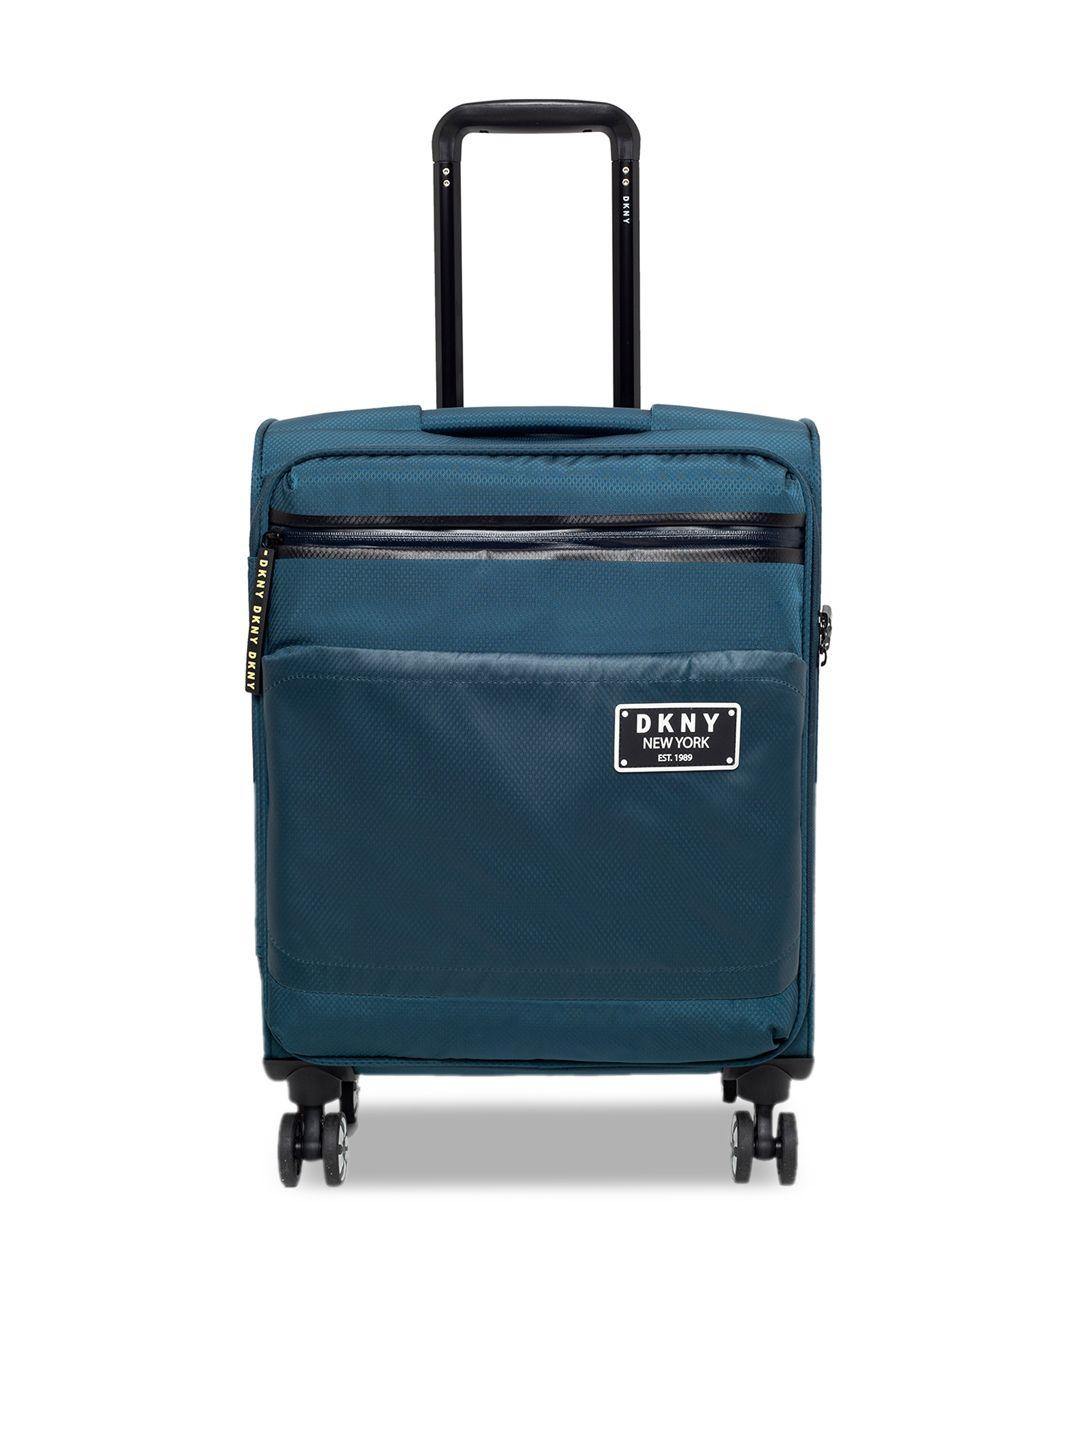 unisex-teal-blue-solid-globe-trotter-soft-sided-cabin-trolley-suitcase